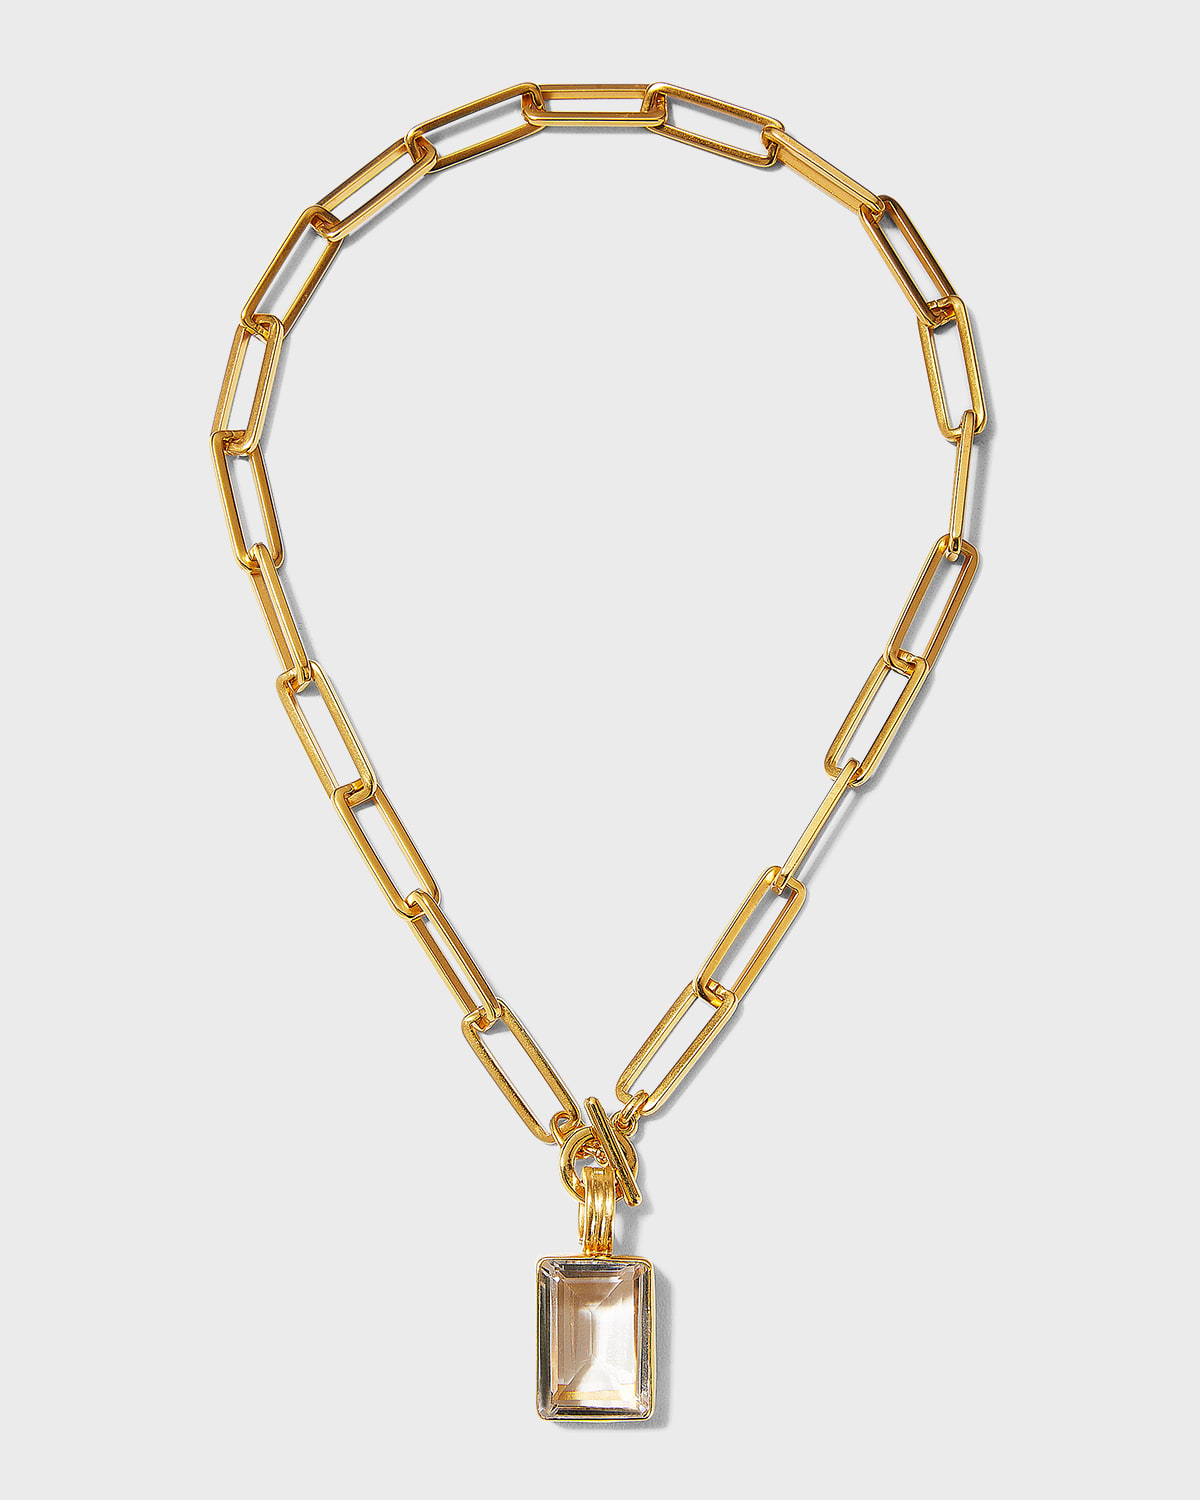 Dina Mackney Emerald-cut Faceted Quartz Pendant On Paperclip Chain Necklace In Gold